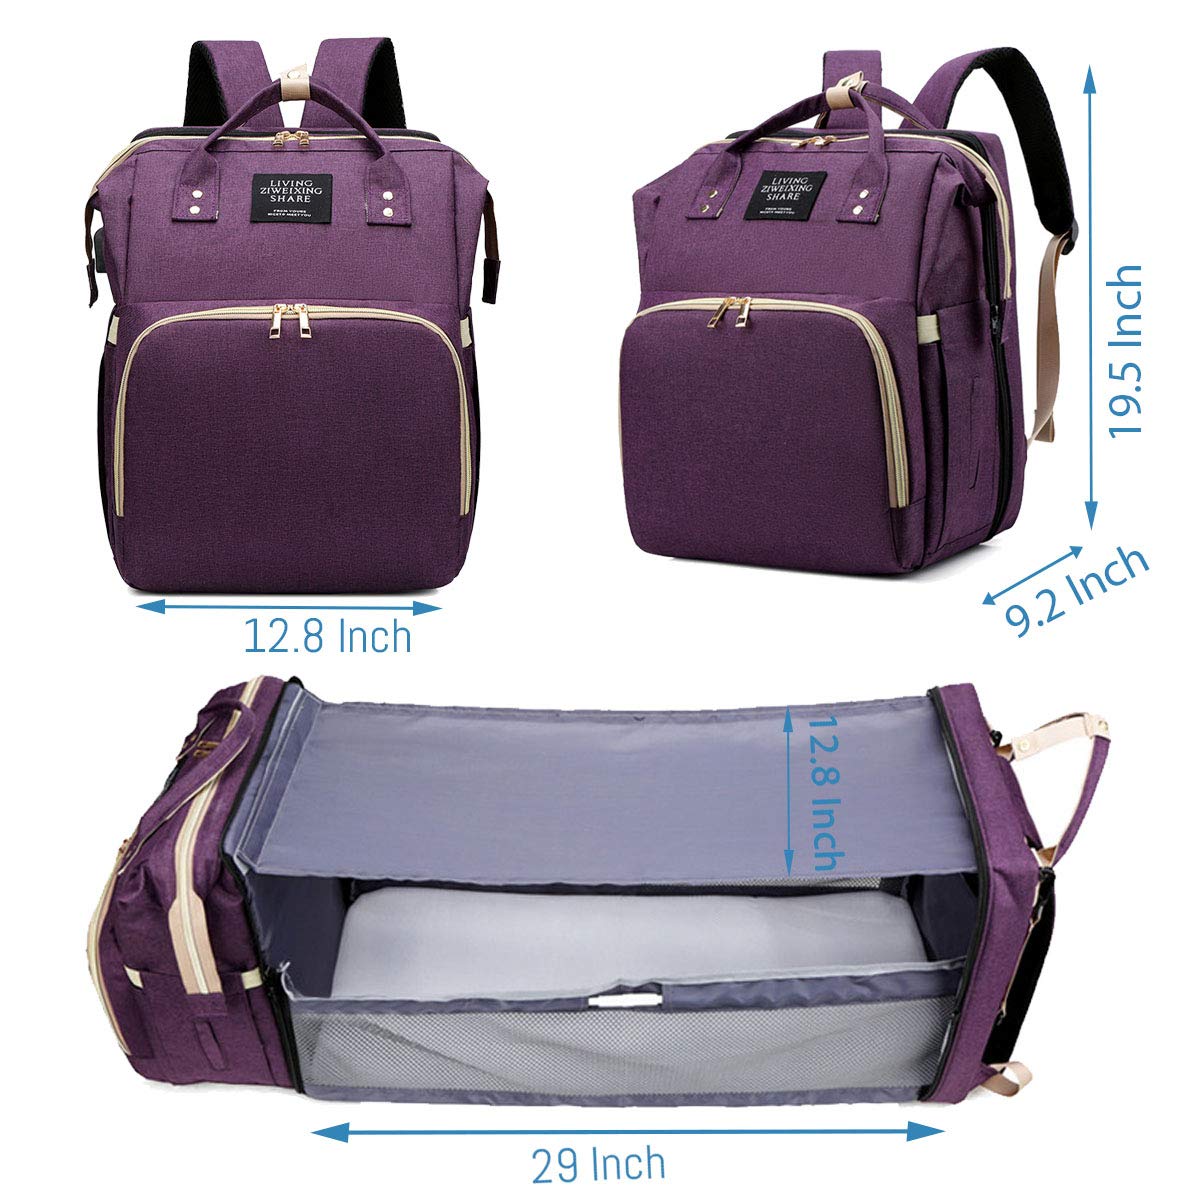 SALIFA Diaper Bag Backpack with Changing Station